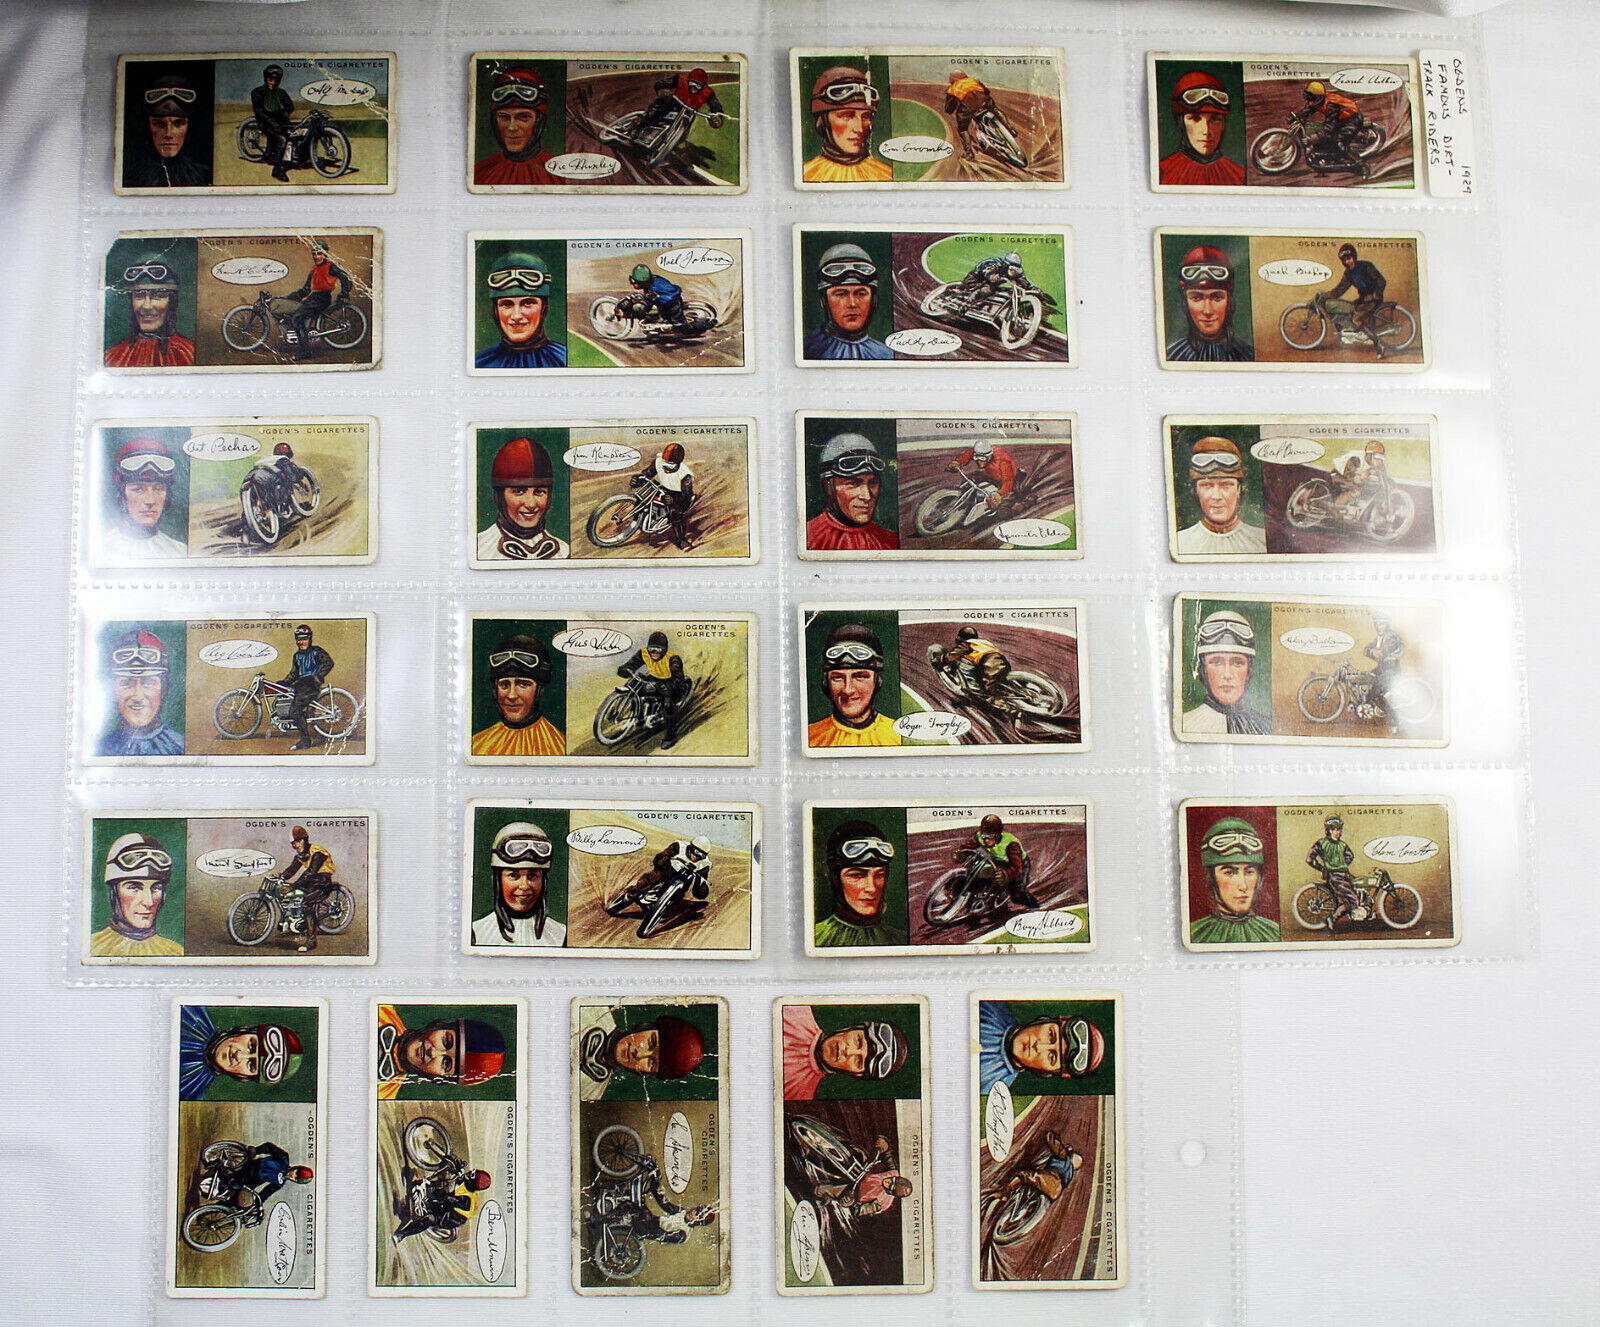 Vintage Motorcycle Racing Trade Card Sets 1920's - Two Sets